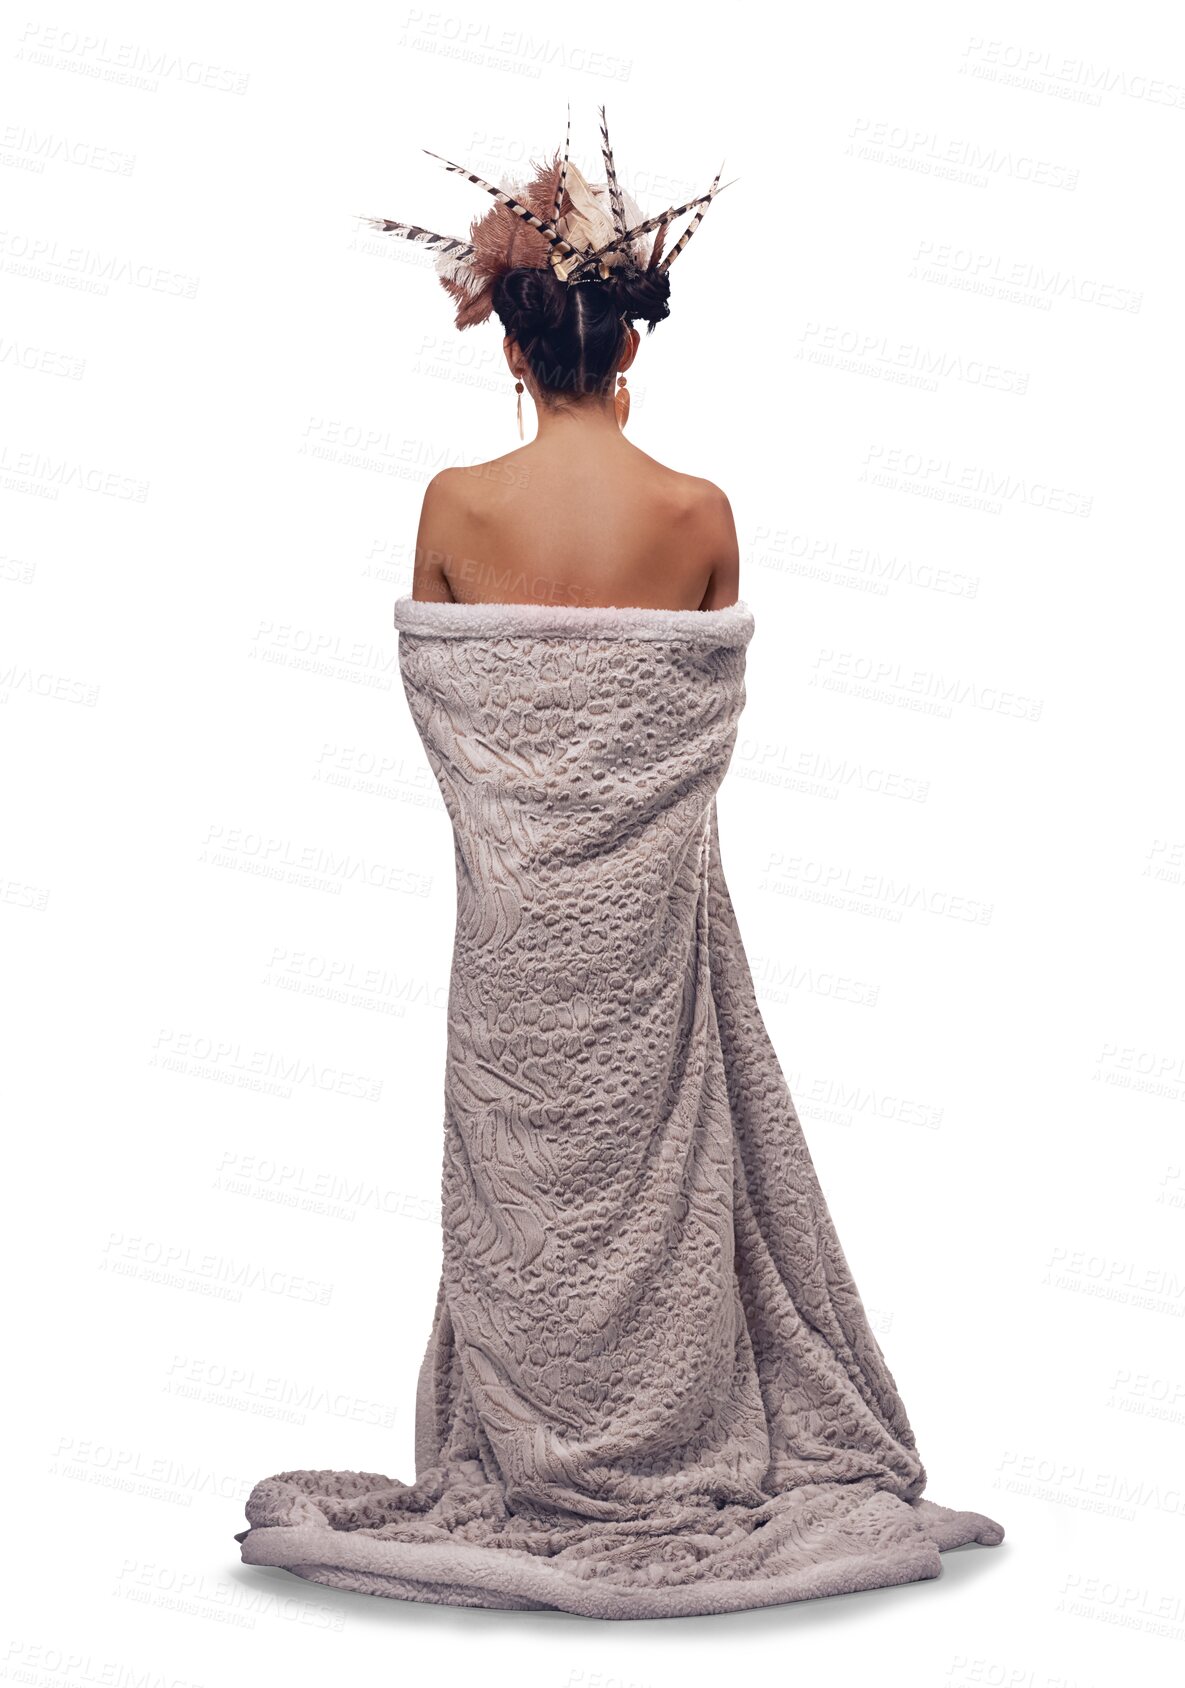 Buy stock photo Woman, back and crown in traditional cloth standing isolated on a transparent PNG background. Rear view of young female person or model posing with blanket, robe or headdress of goddess in fashion